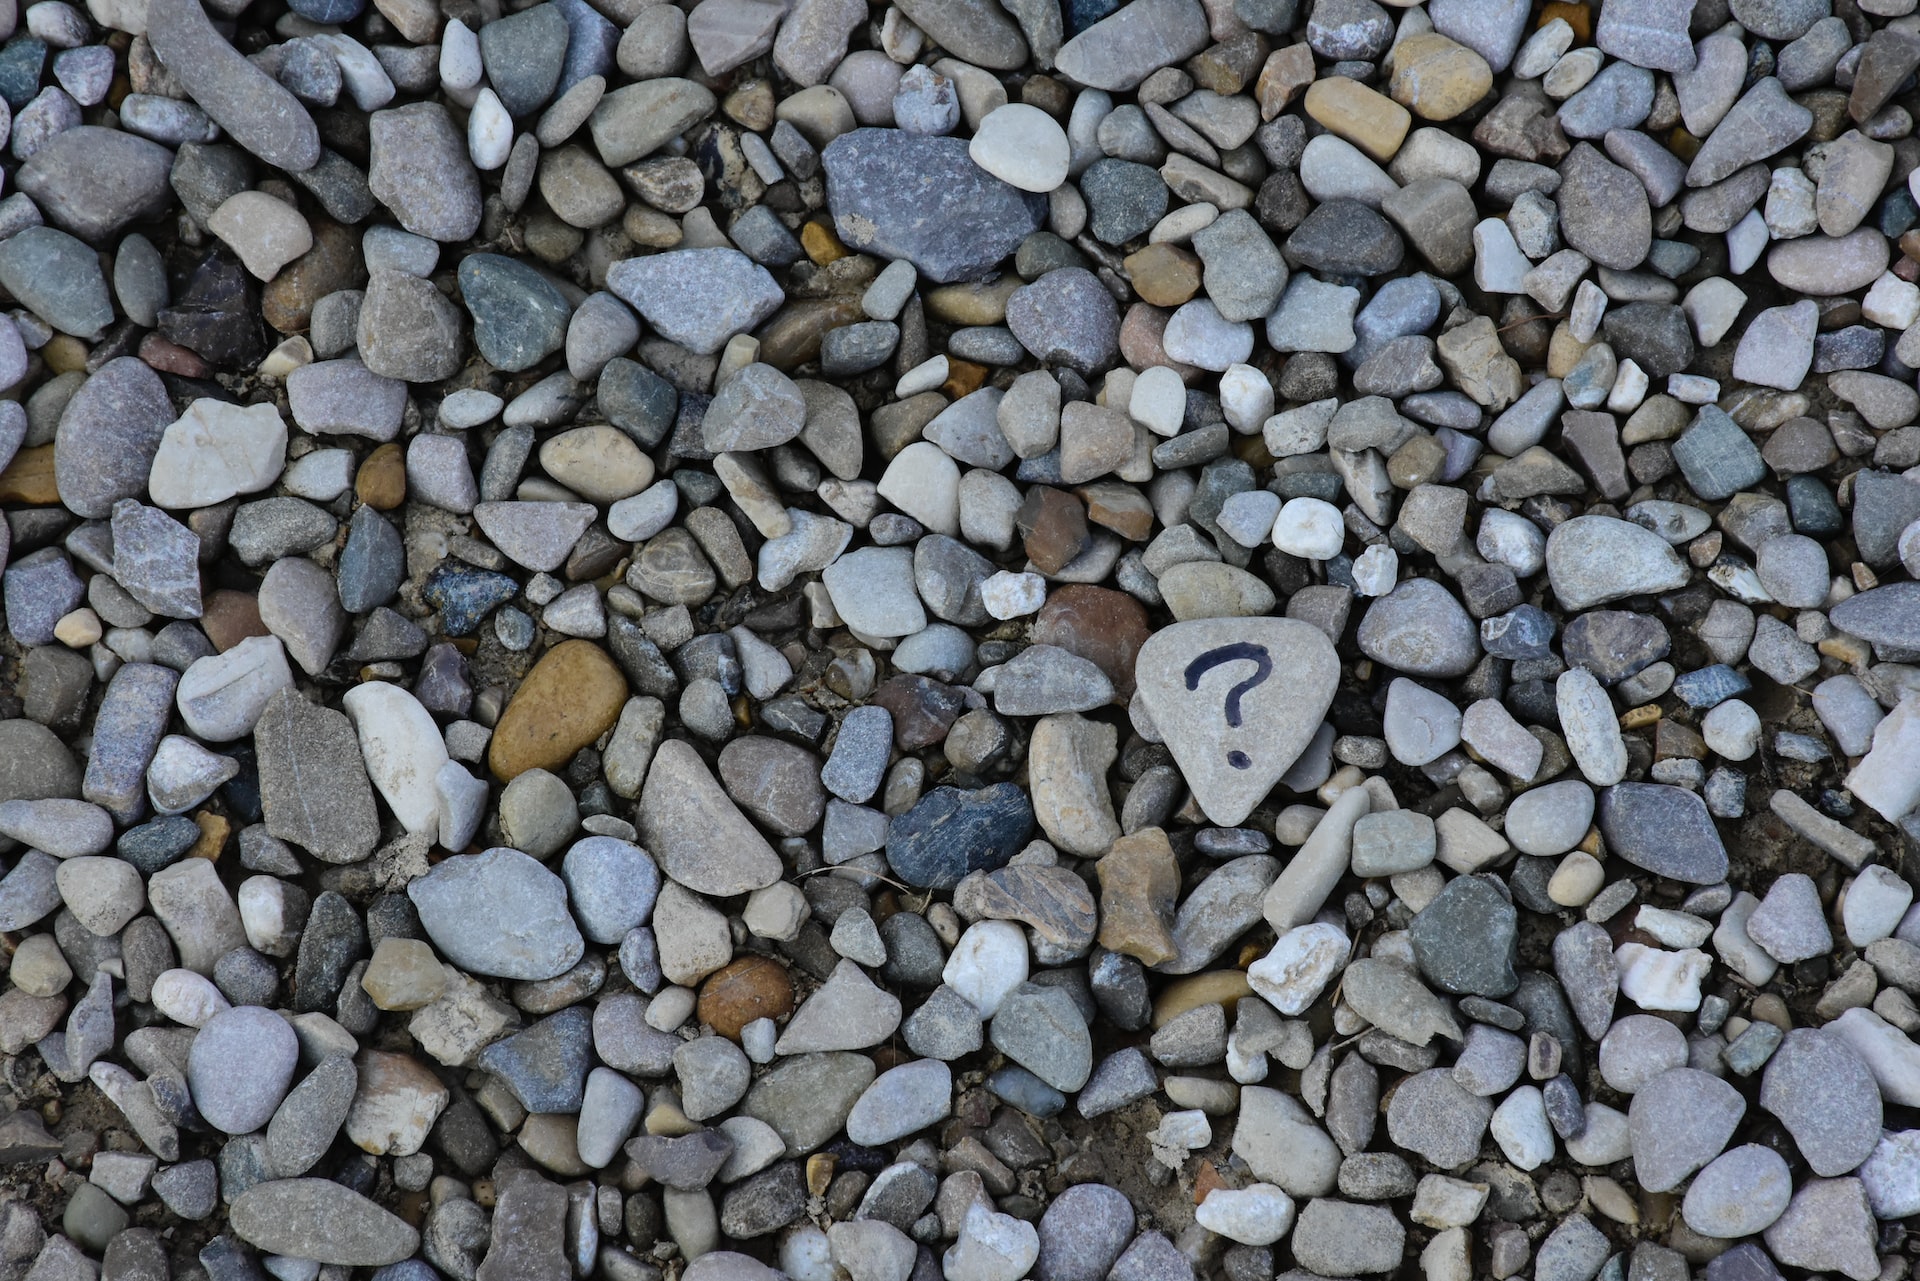 Assortment of pebbles, one with a question mark.